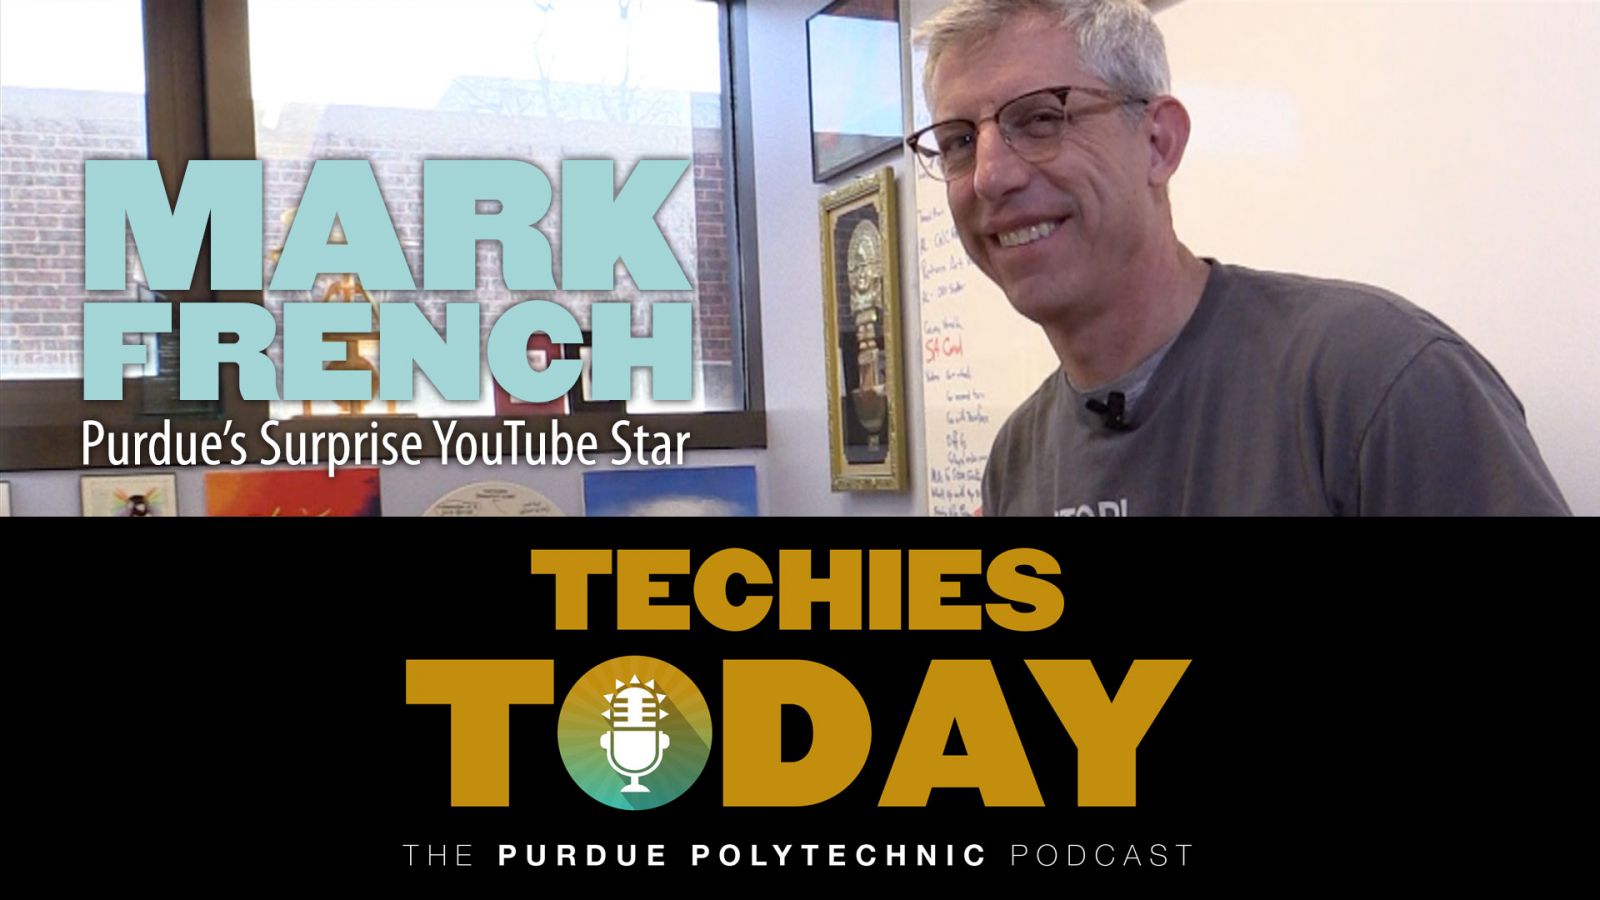 Mark French, Purdue's Surprise YouTube Star, on Techies Today, the Purdue Polytechnic Podcast